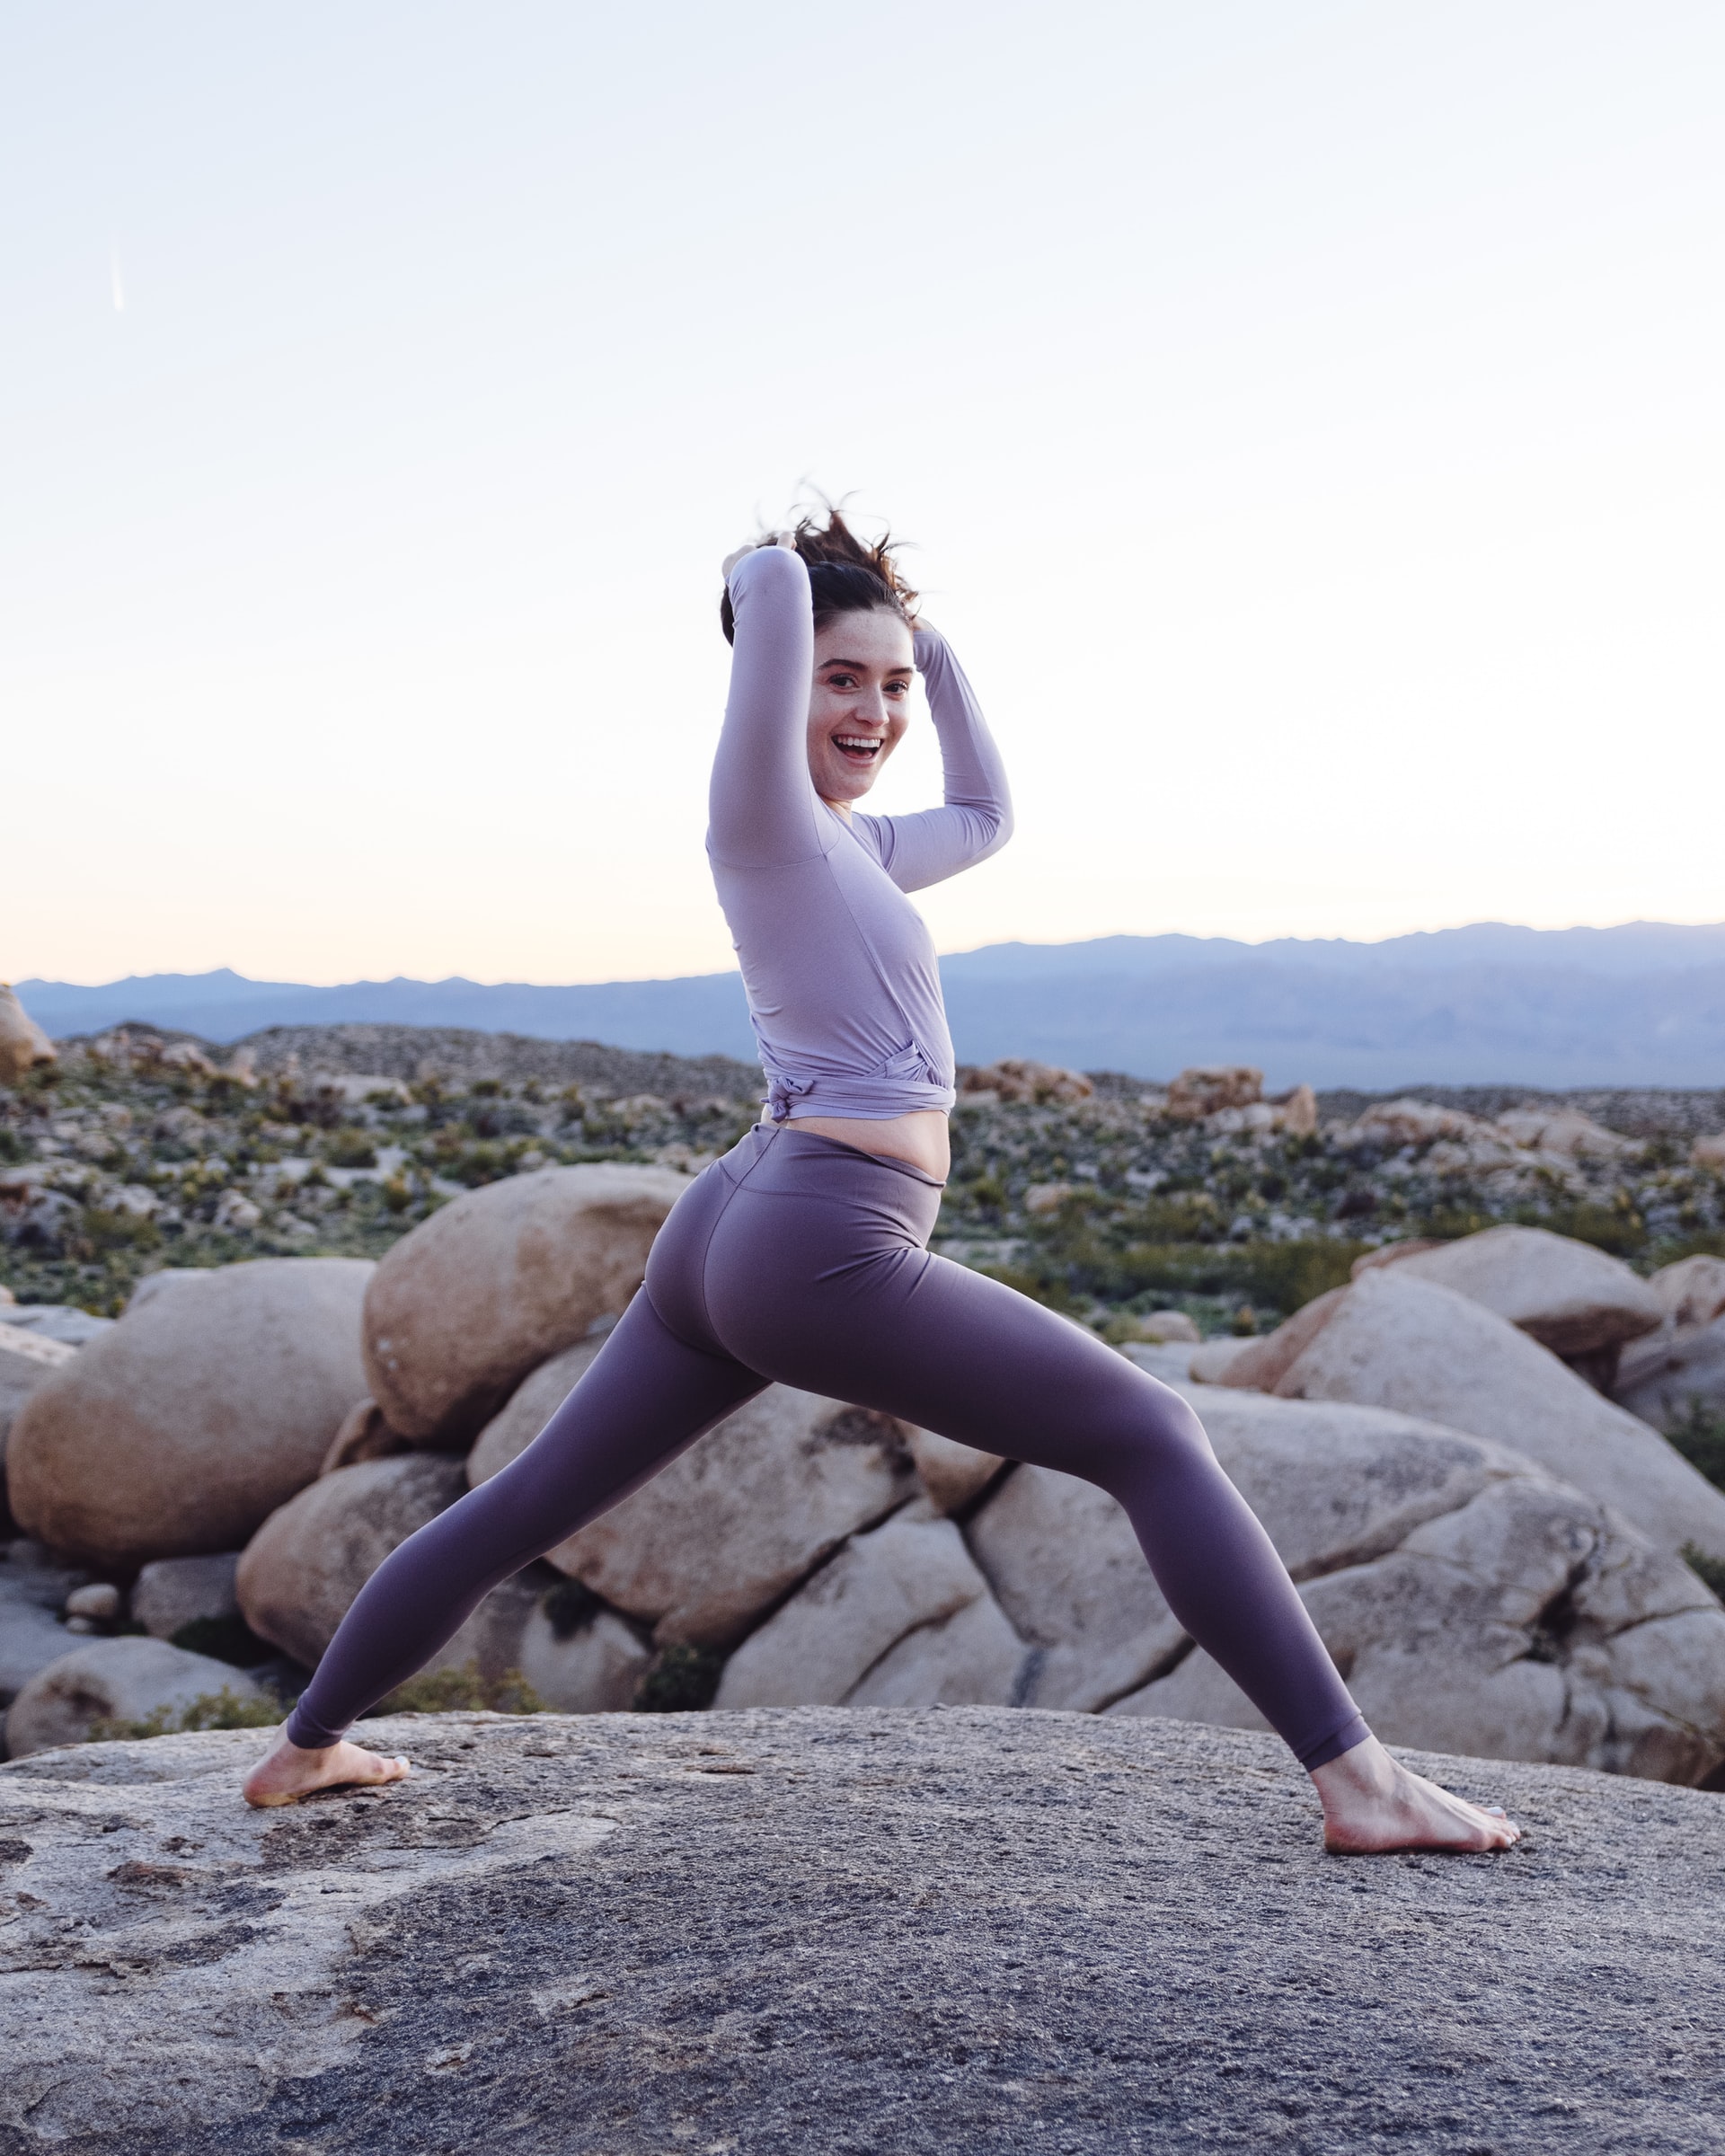 Need A Reset? Here’s An Earth-Inspired Yoga Flow That You Can Do Outside